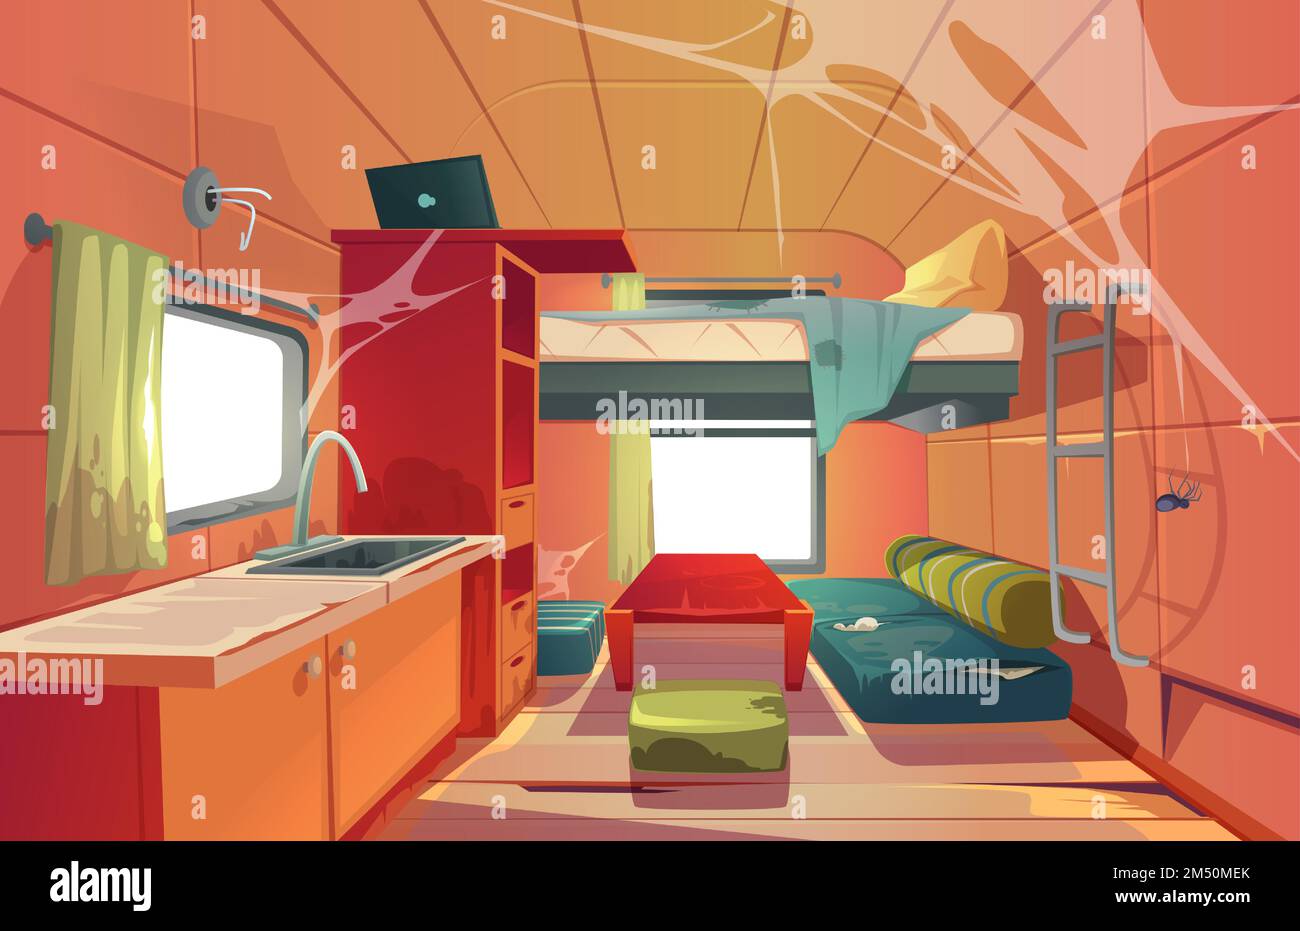 Abandoned camping trailer car interior with loft bed, ragged couch, kitchen sink, desk with laptop, bookshelf and window covered with spider web. Neglected Rv motor home. Cartoon vector illustration Stock Vector